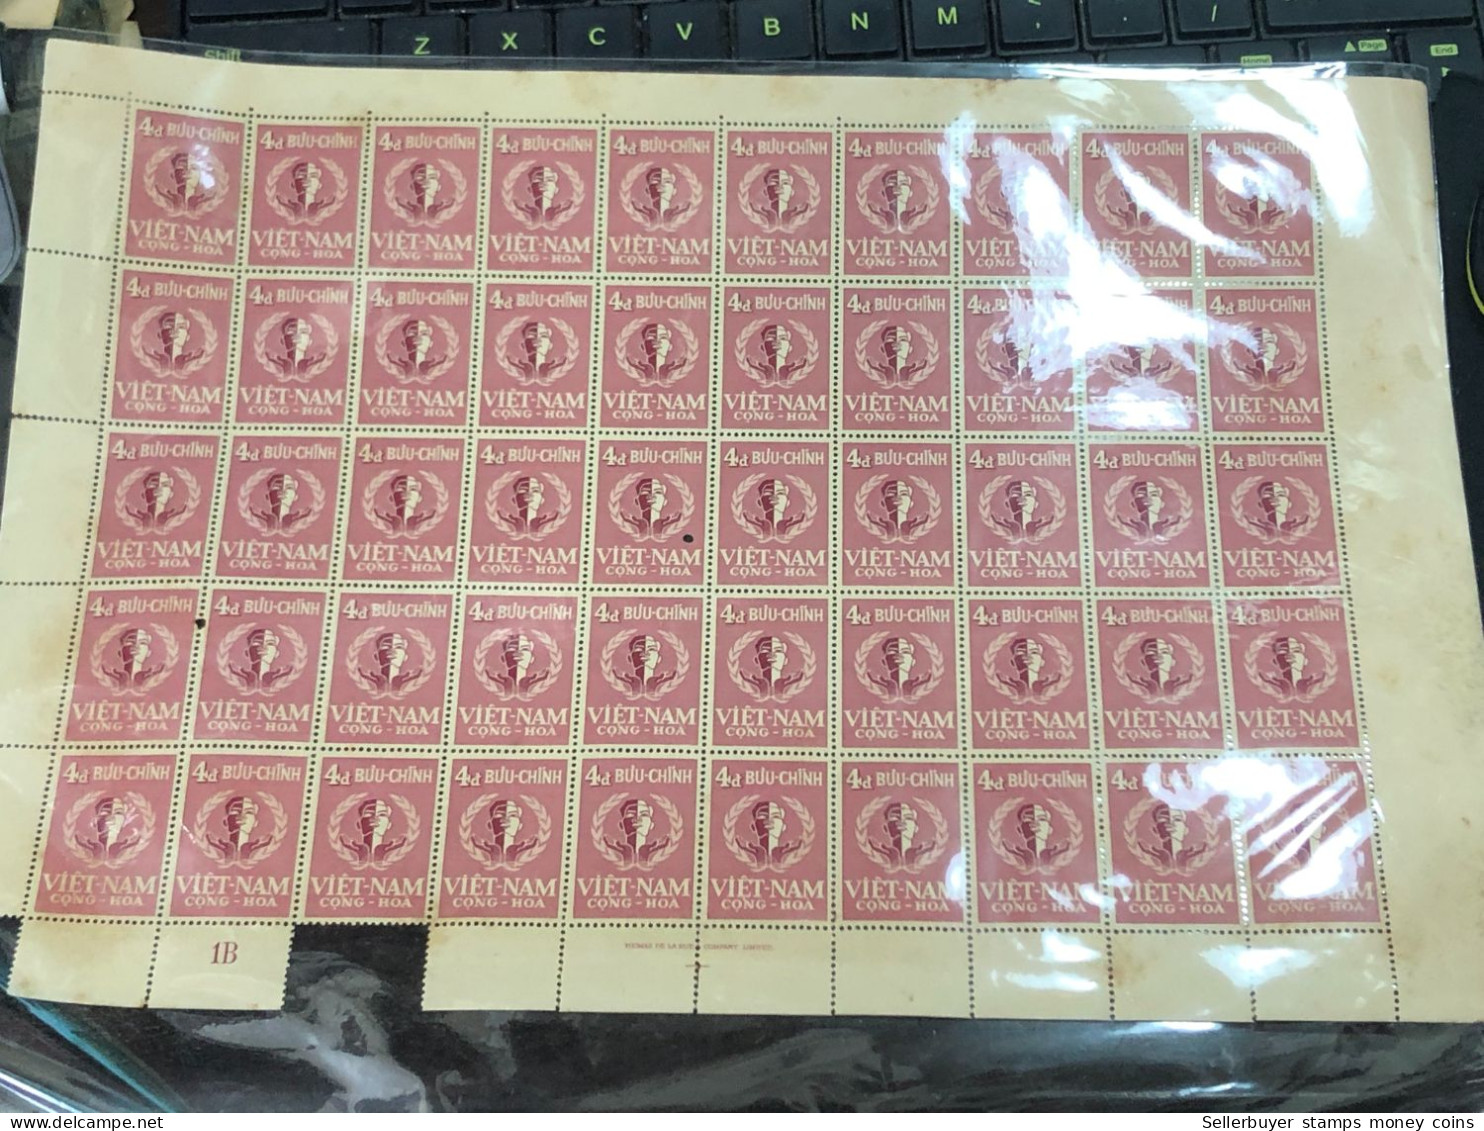 Vietnam South Sheet Stamps Before 1975(4$ Personne Humaine 1958) 1 Pcs 50 Stamps Quality Good - Viêt-Nam